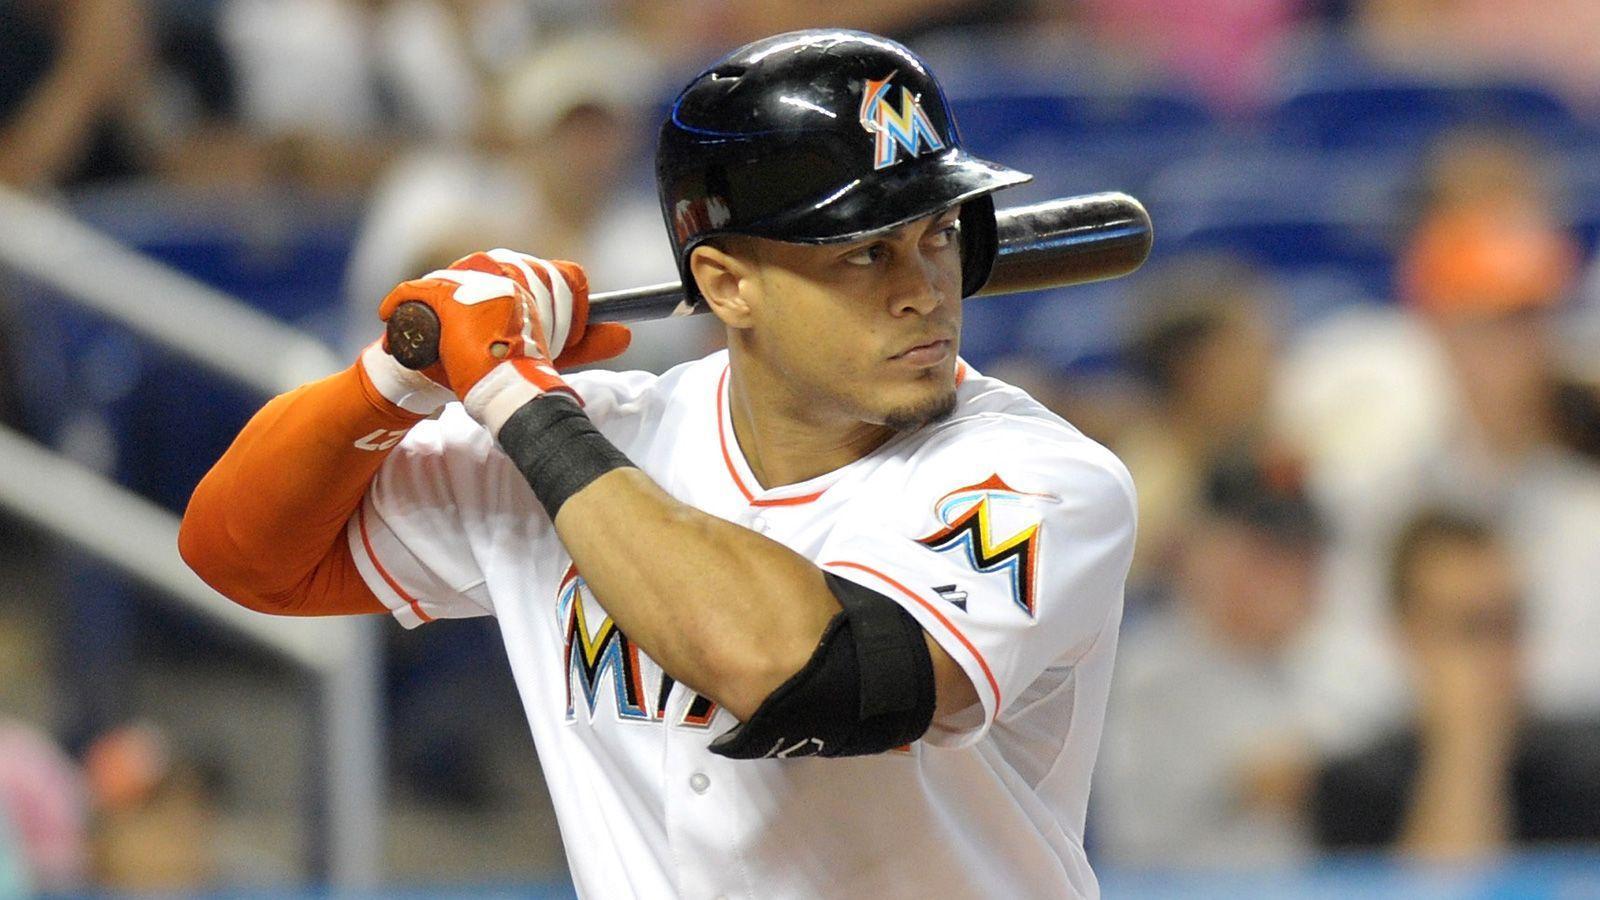 Giancarlo Stanton's New Contract is Absurd. No Coast Bias